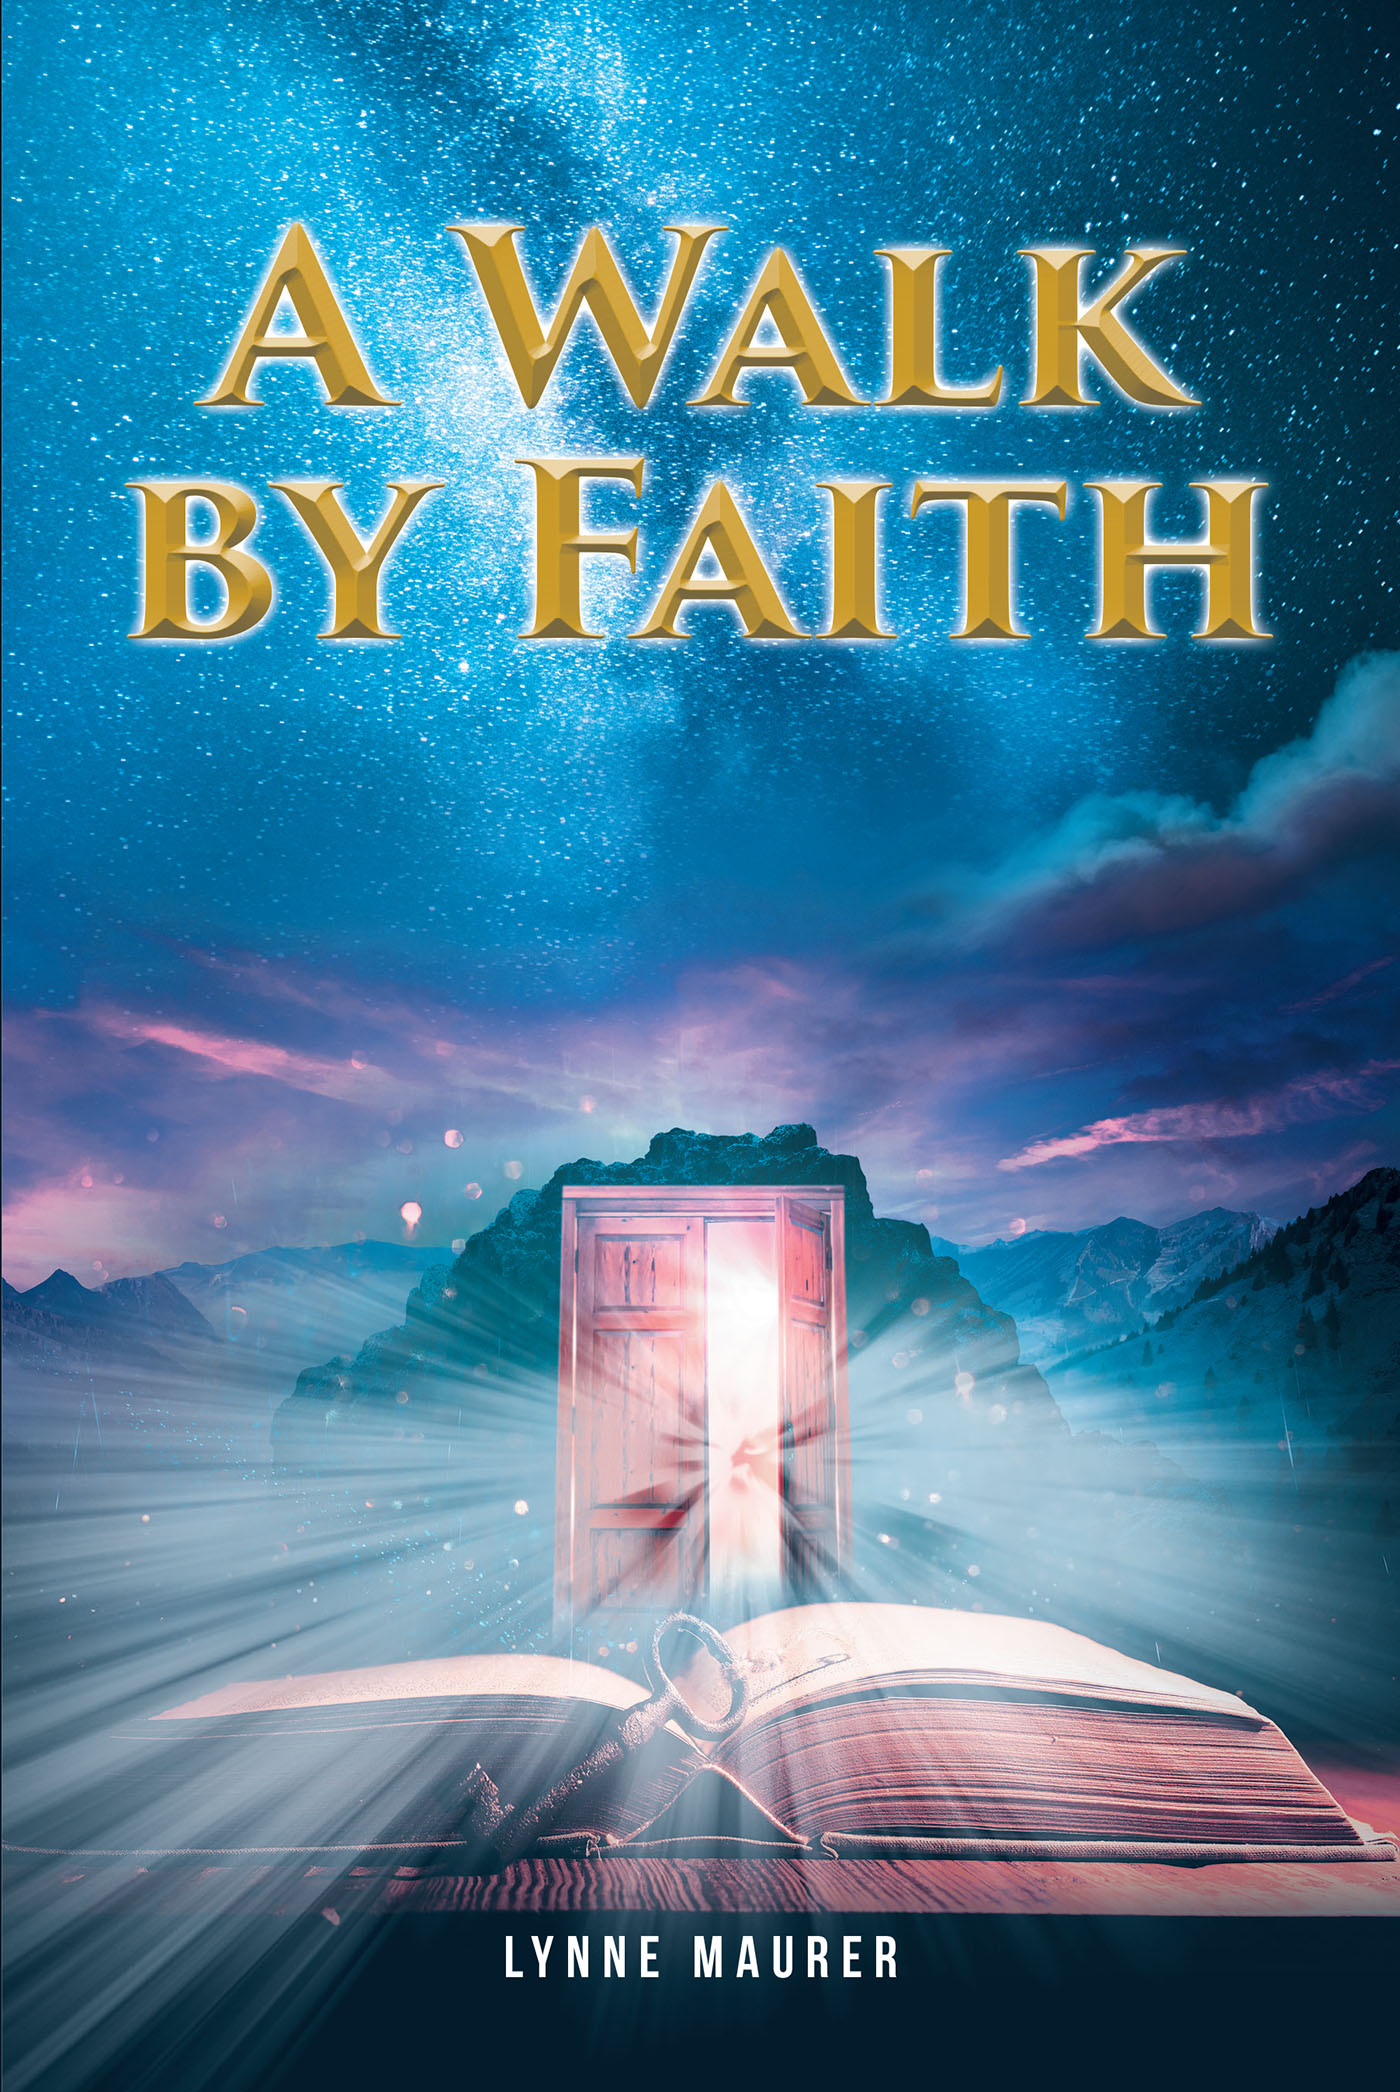 Lynne Maurer’s Newly Released "A Walk by Faith" Shares a Profound Spiritual Journey Through Life’s Challenges